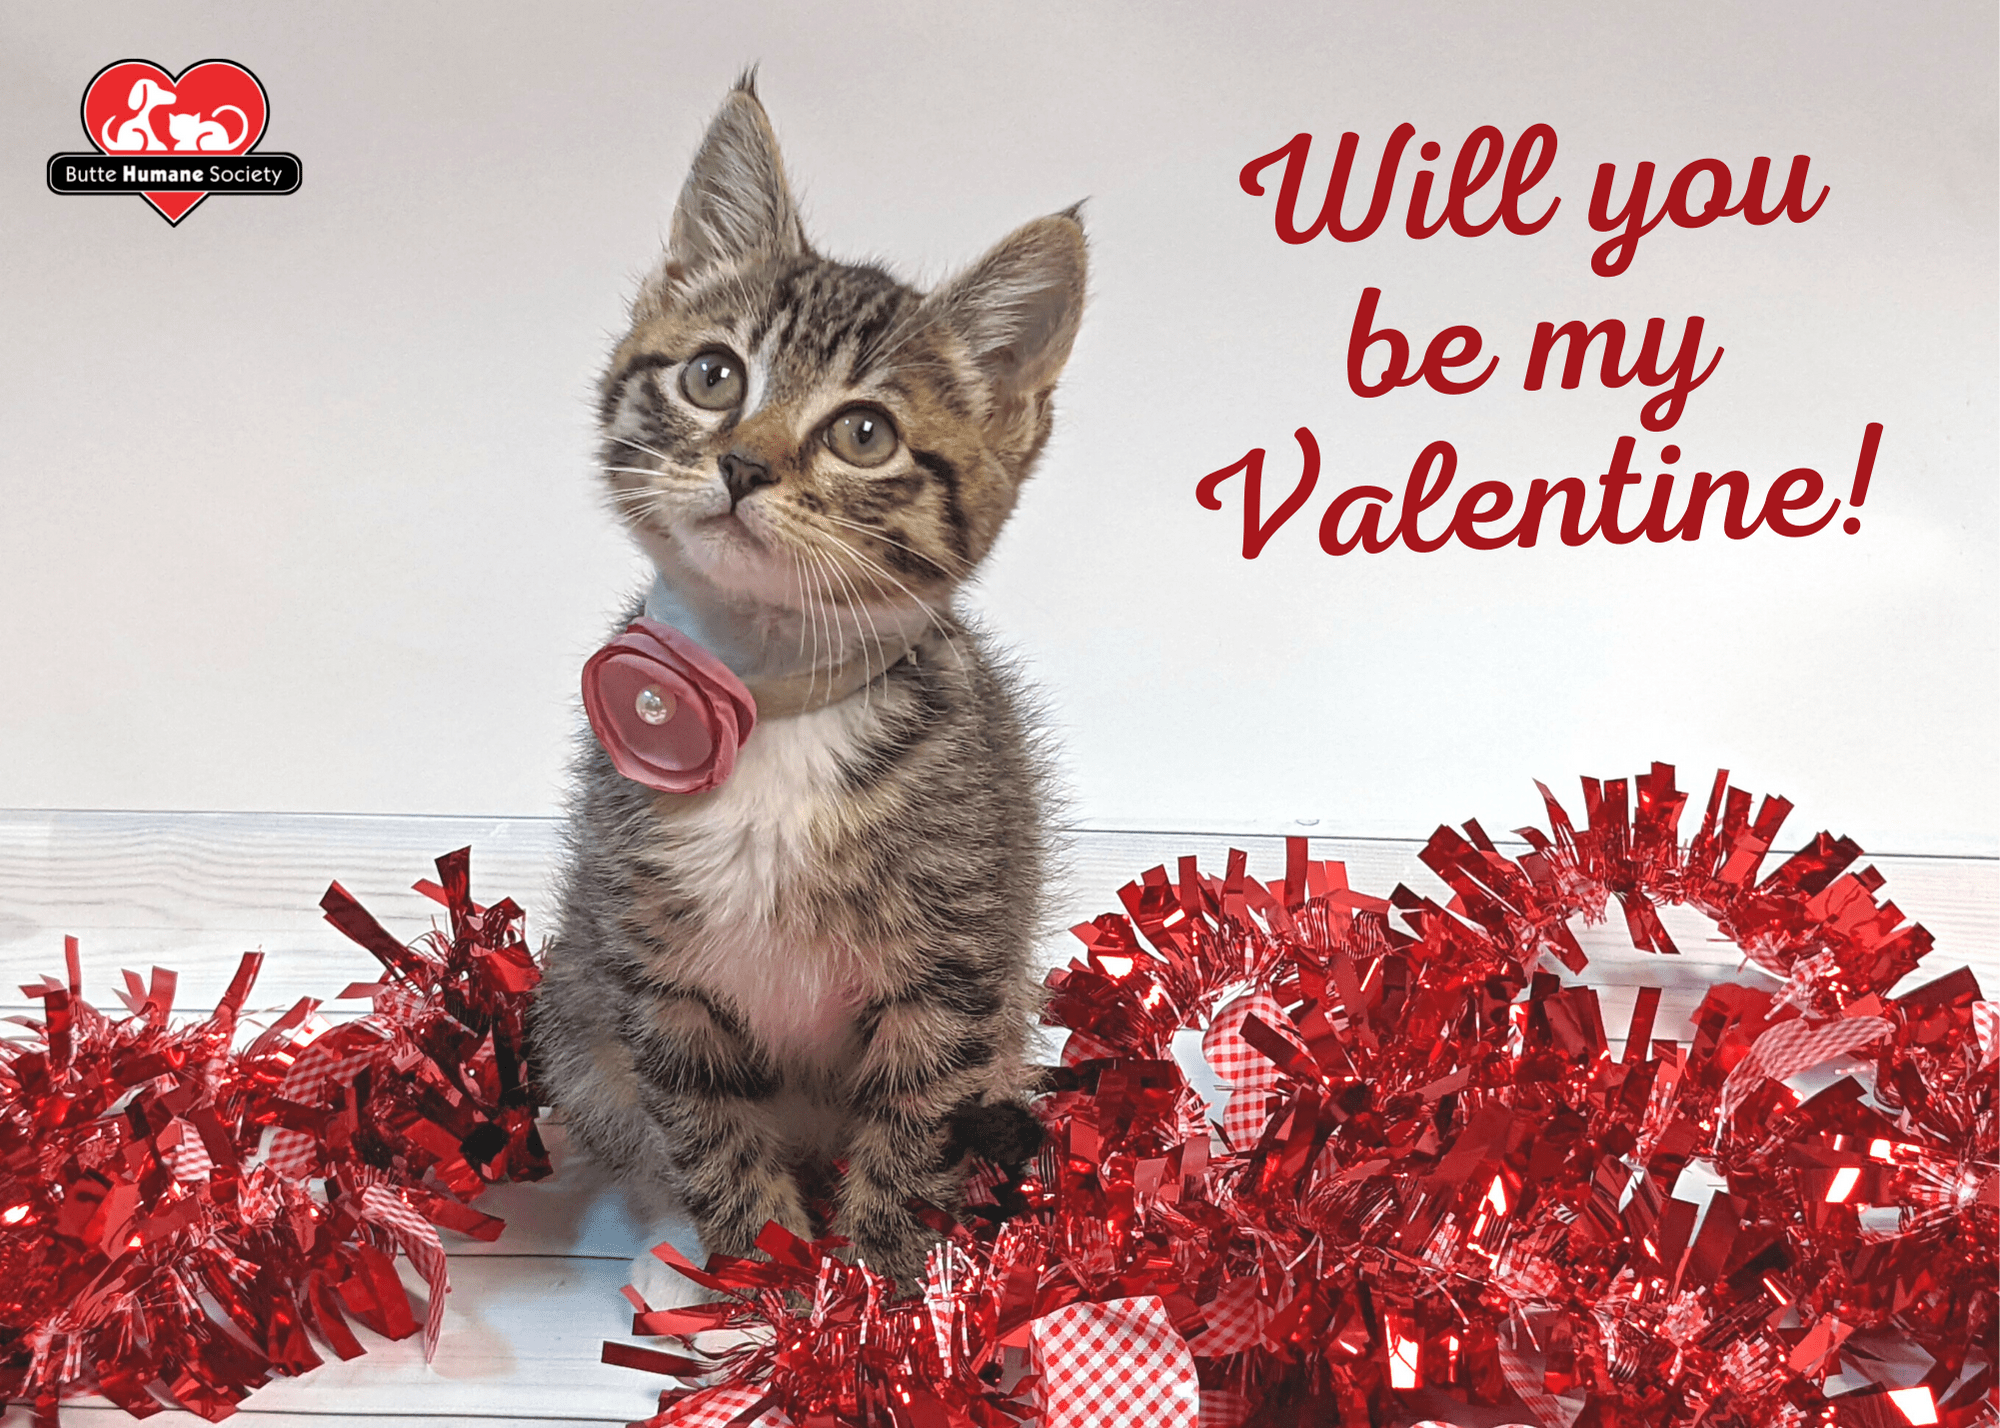 Valentines day Card of a Kitten Butte Humane Society